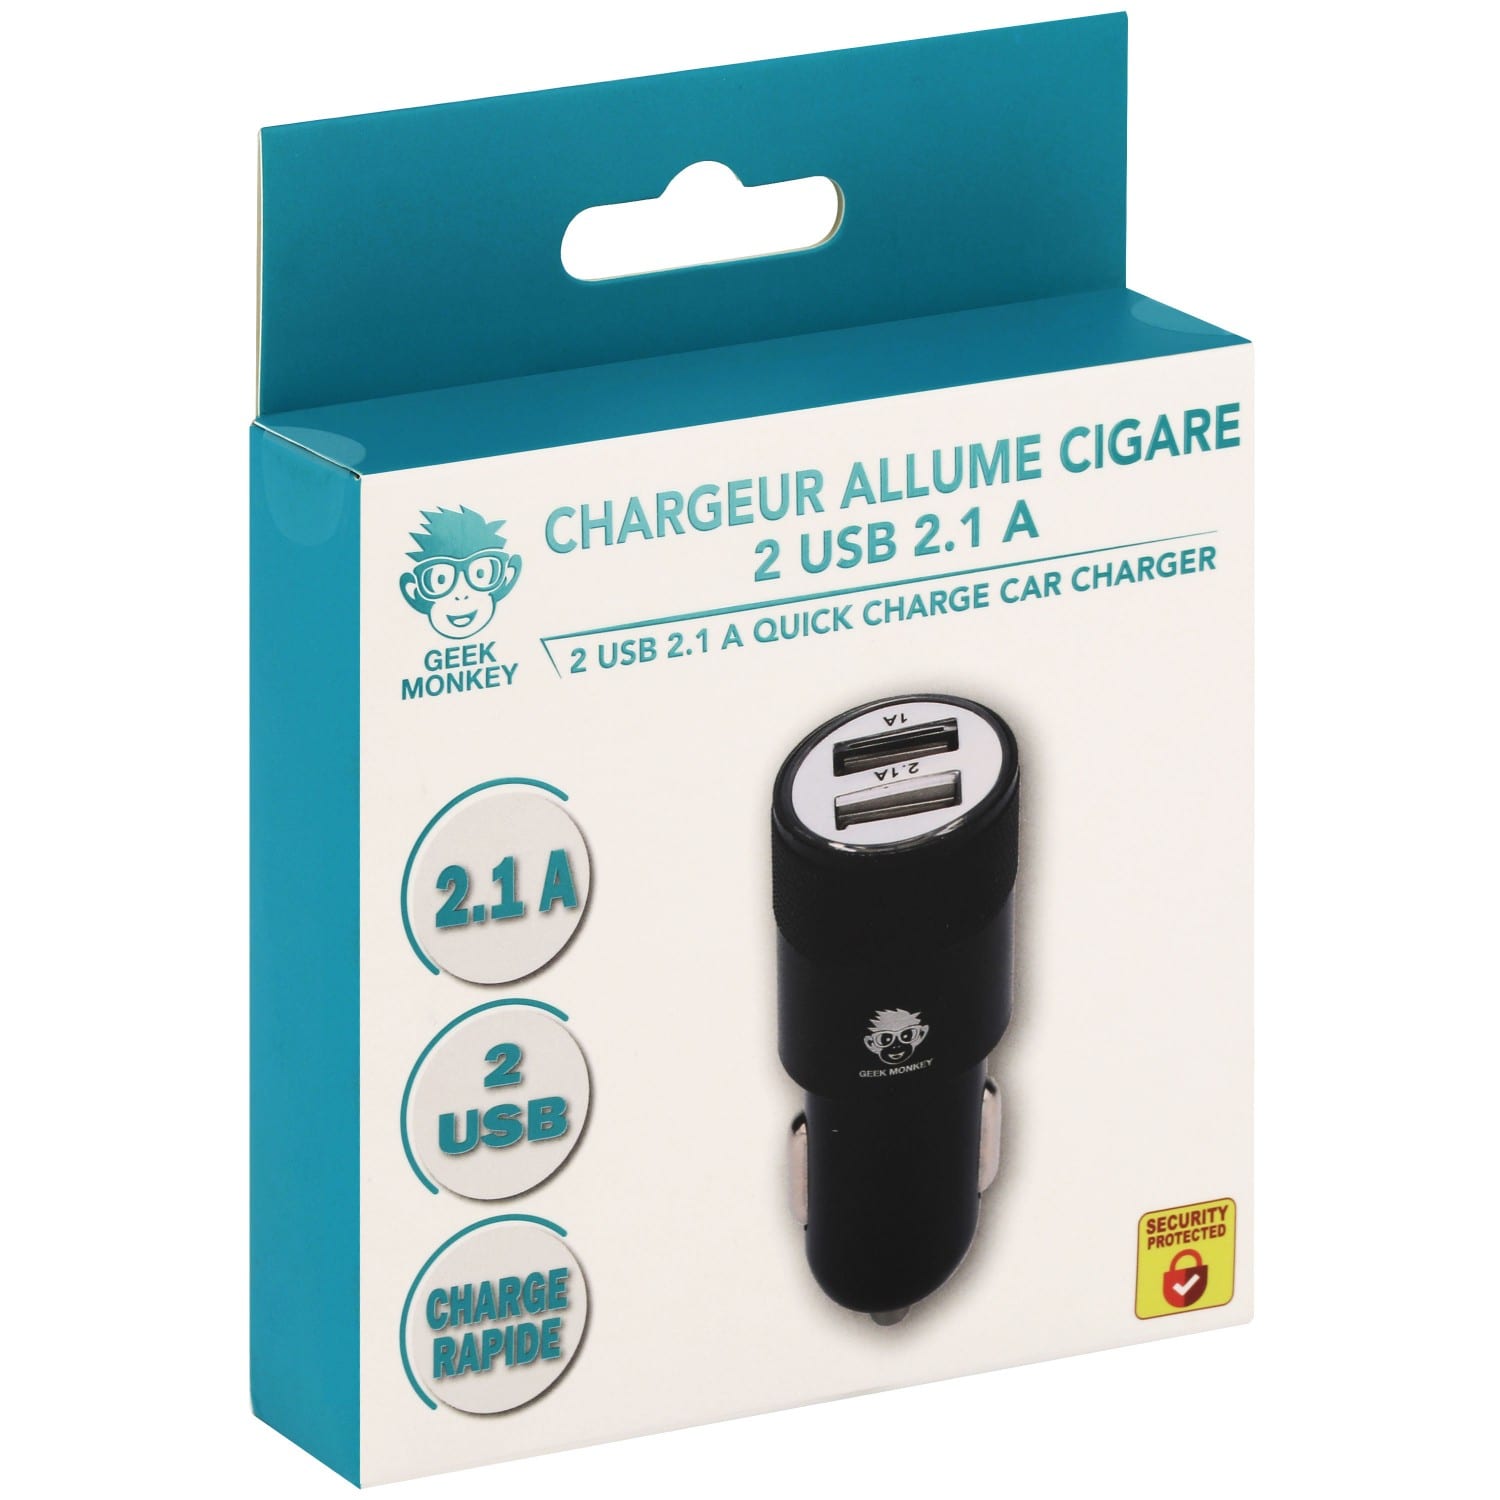 Chargeur GEEK MONKEY allume-cigare - 2x USB-A 2.1 - Charge rapide